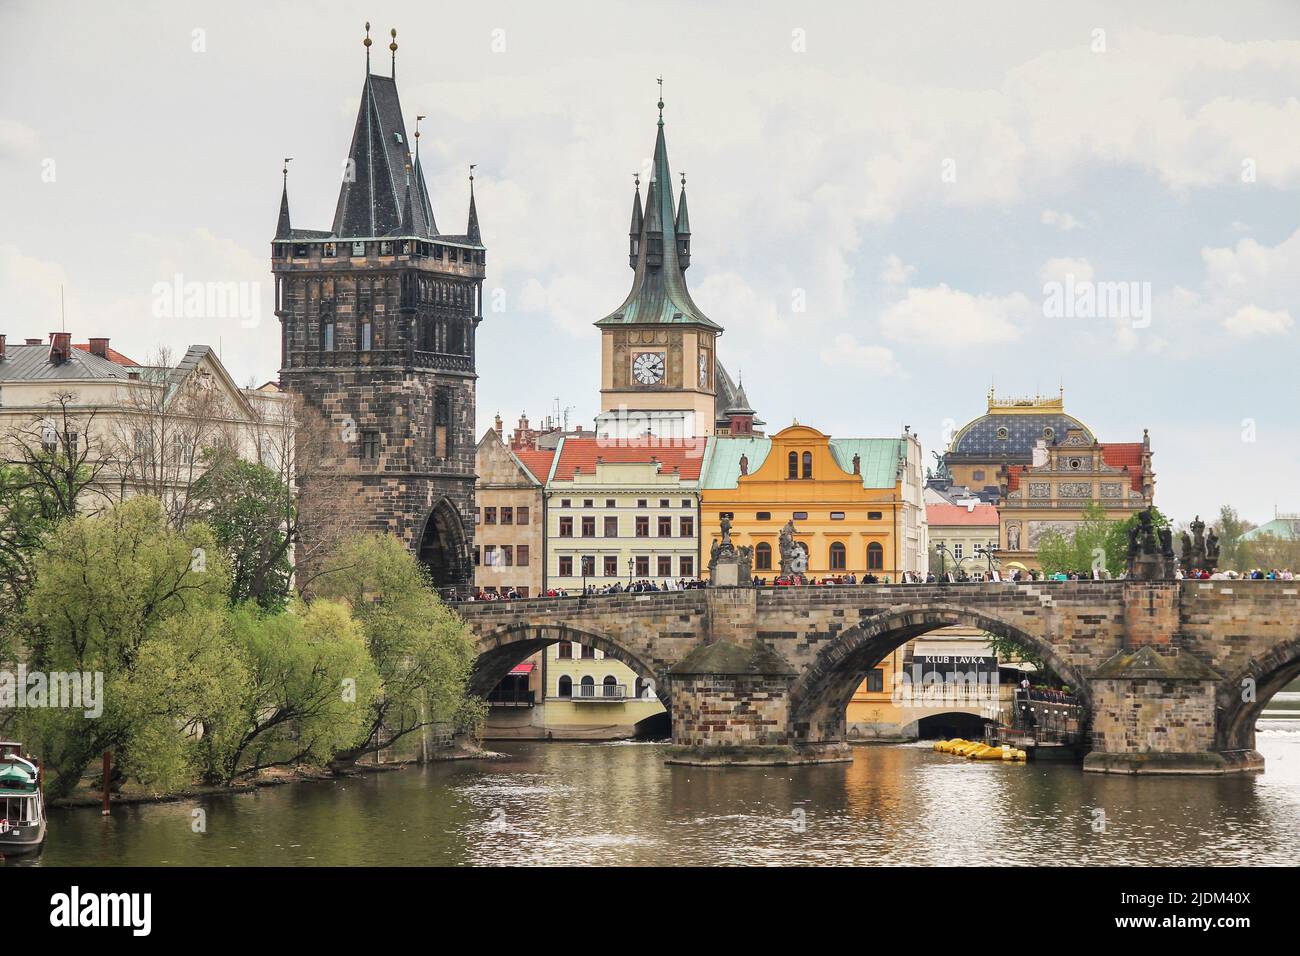 PRAGUE, CZECH - APRIL 24, 2012: This is the Bridge Tower of Charles Bridge and the clock tower of the old hydraulic structure on the right bank of the Stock Photo